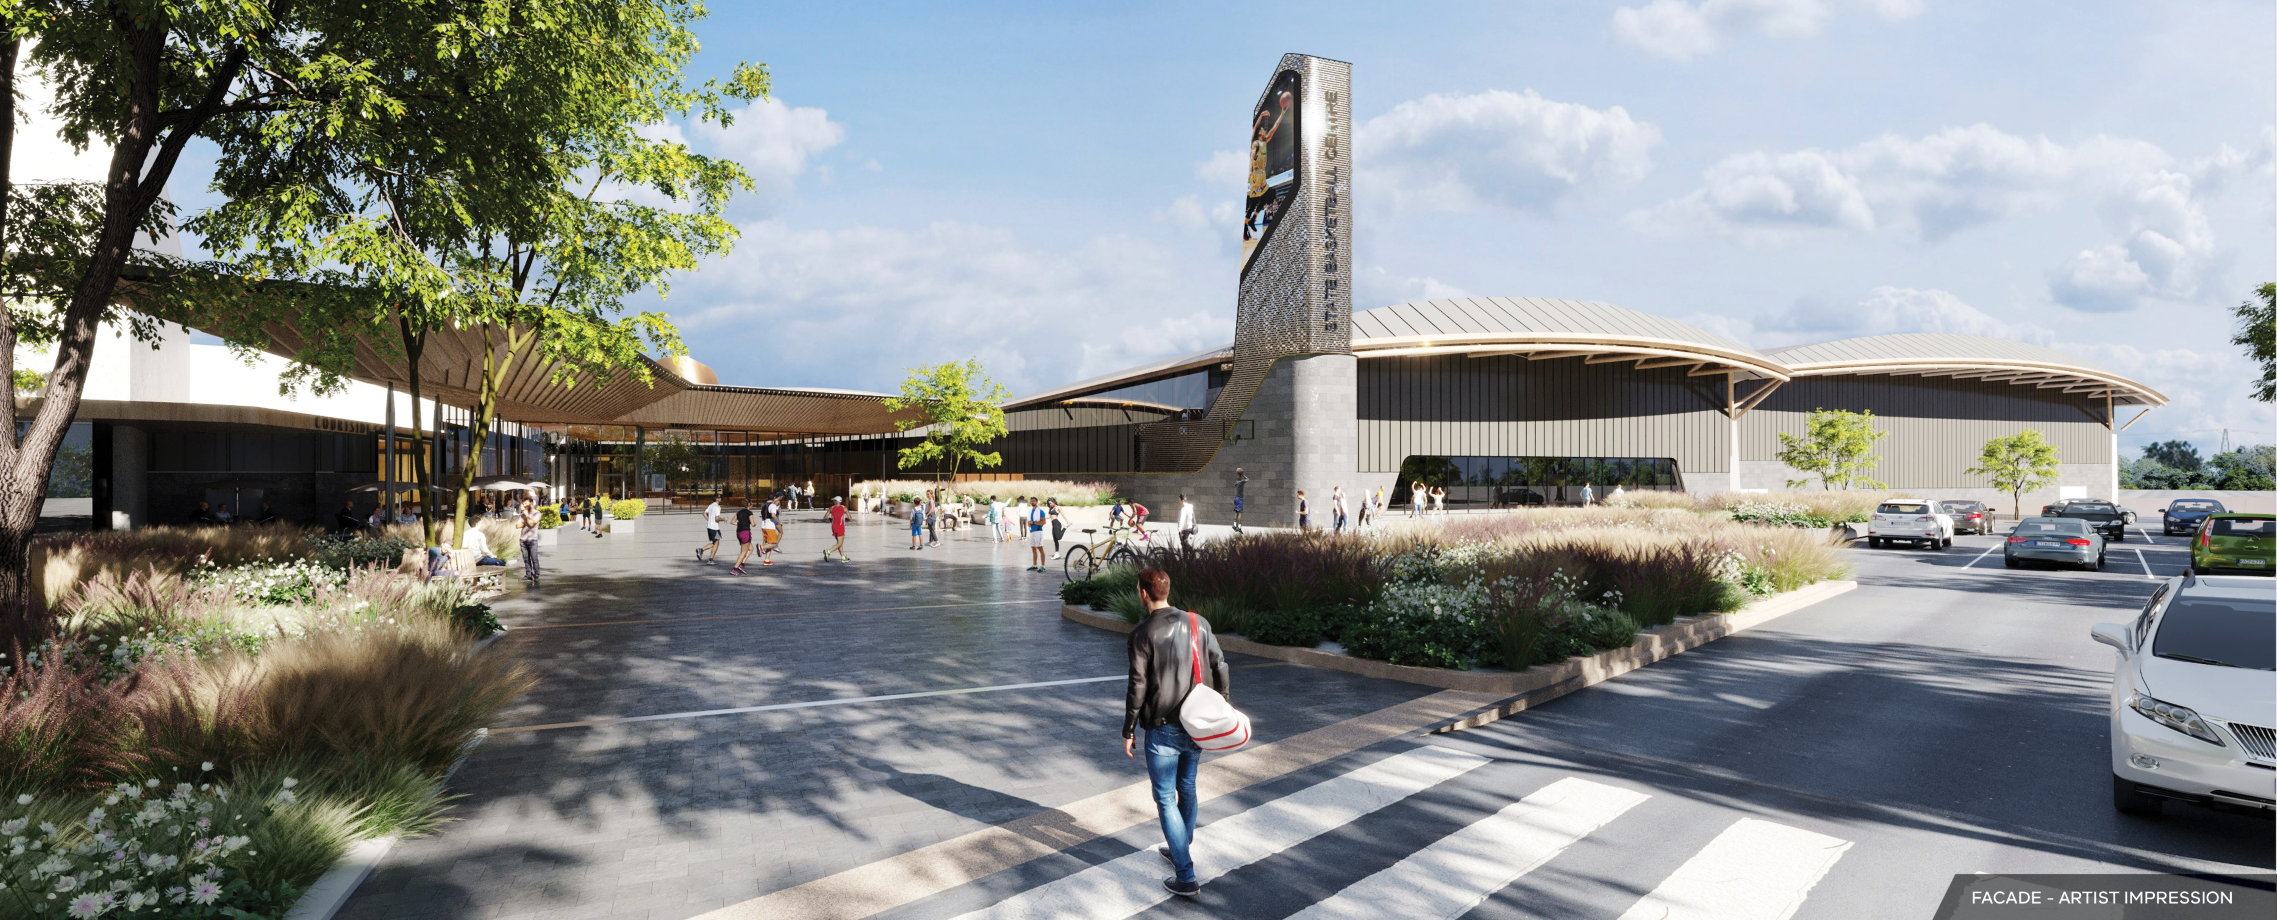 Artist impression of the front of the State Basketball Centre building with a person walking in carrying a bag